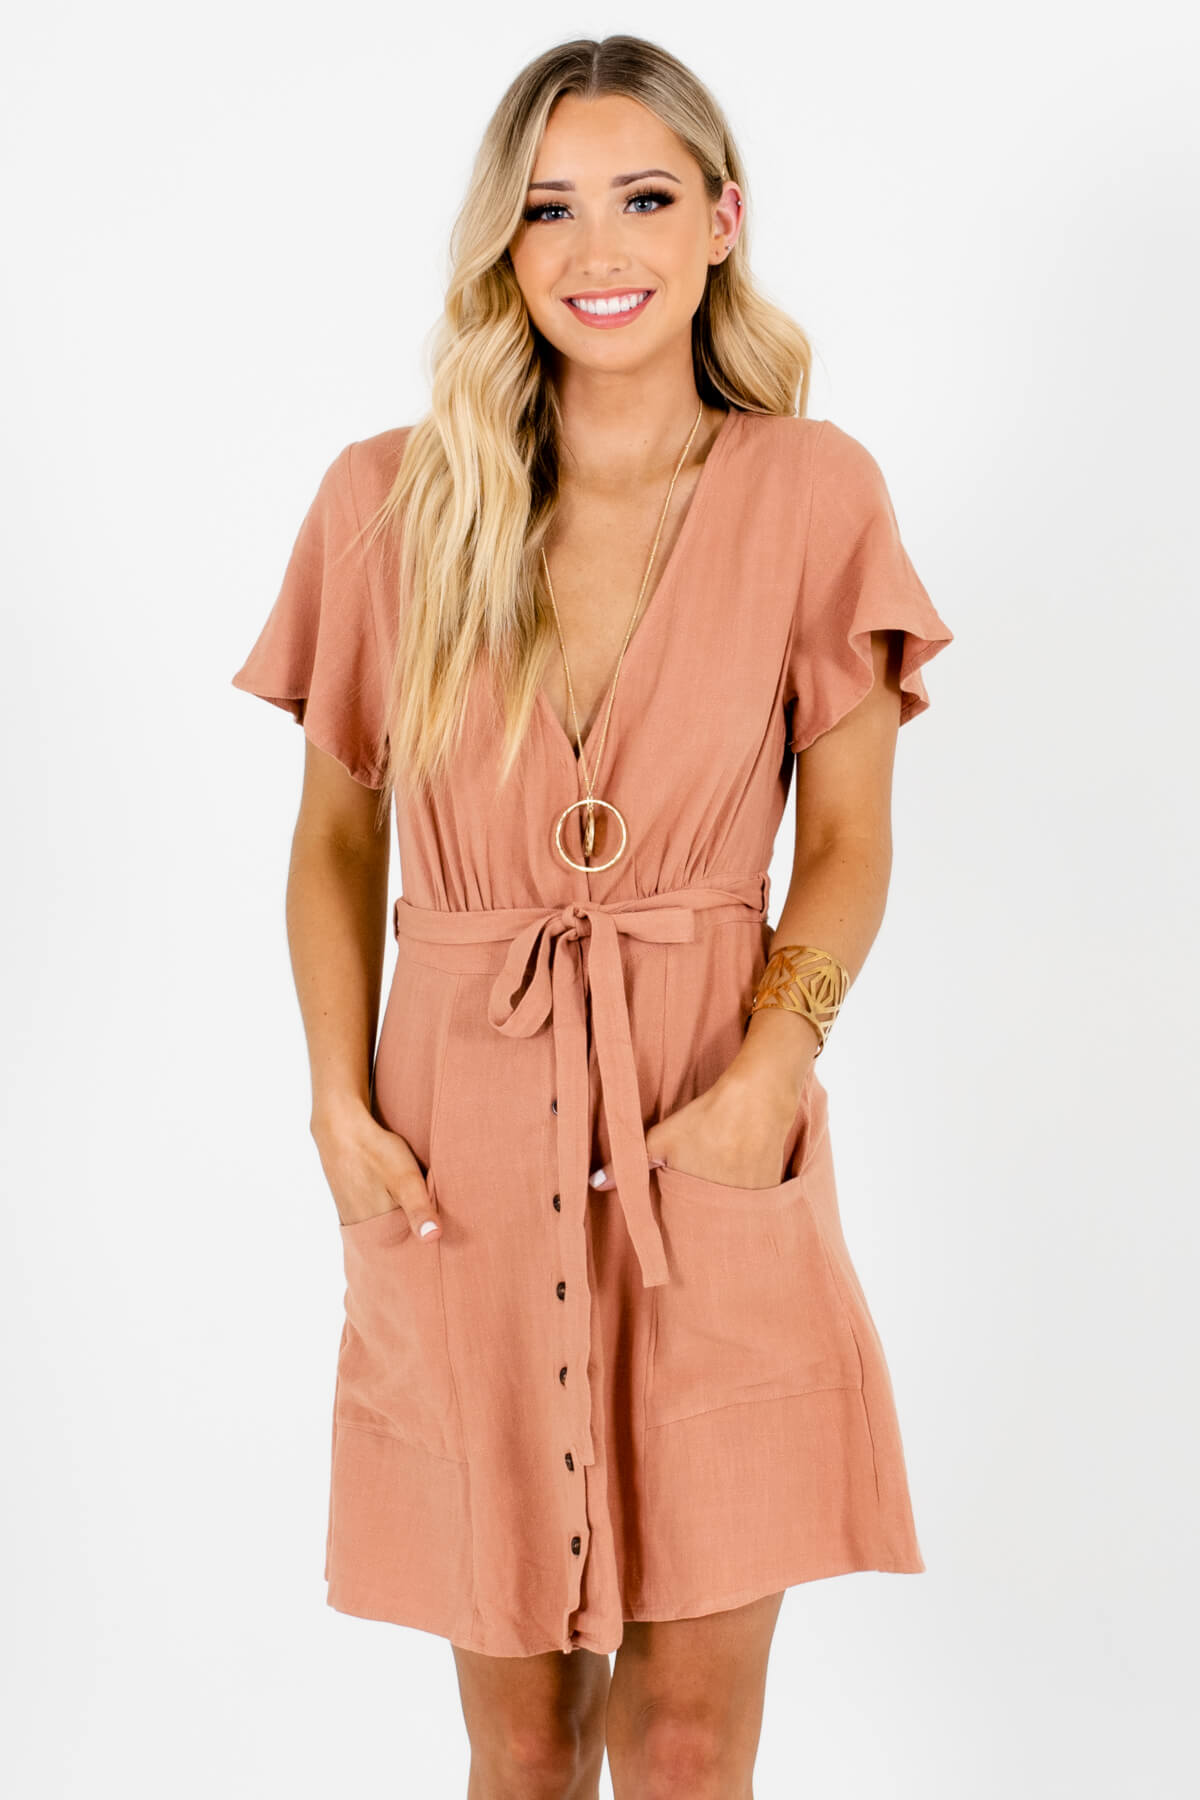 Women's Pink Boutique Mini Dresses with Pockets